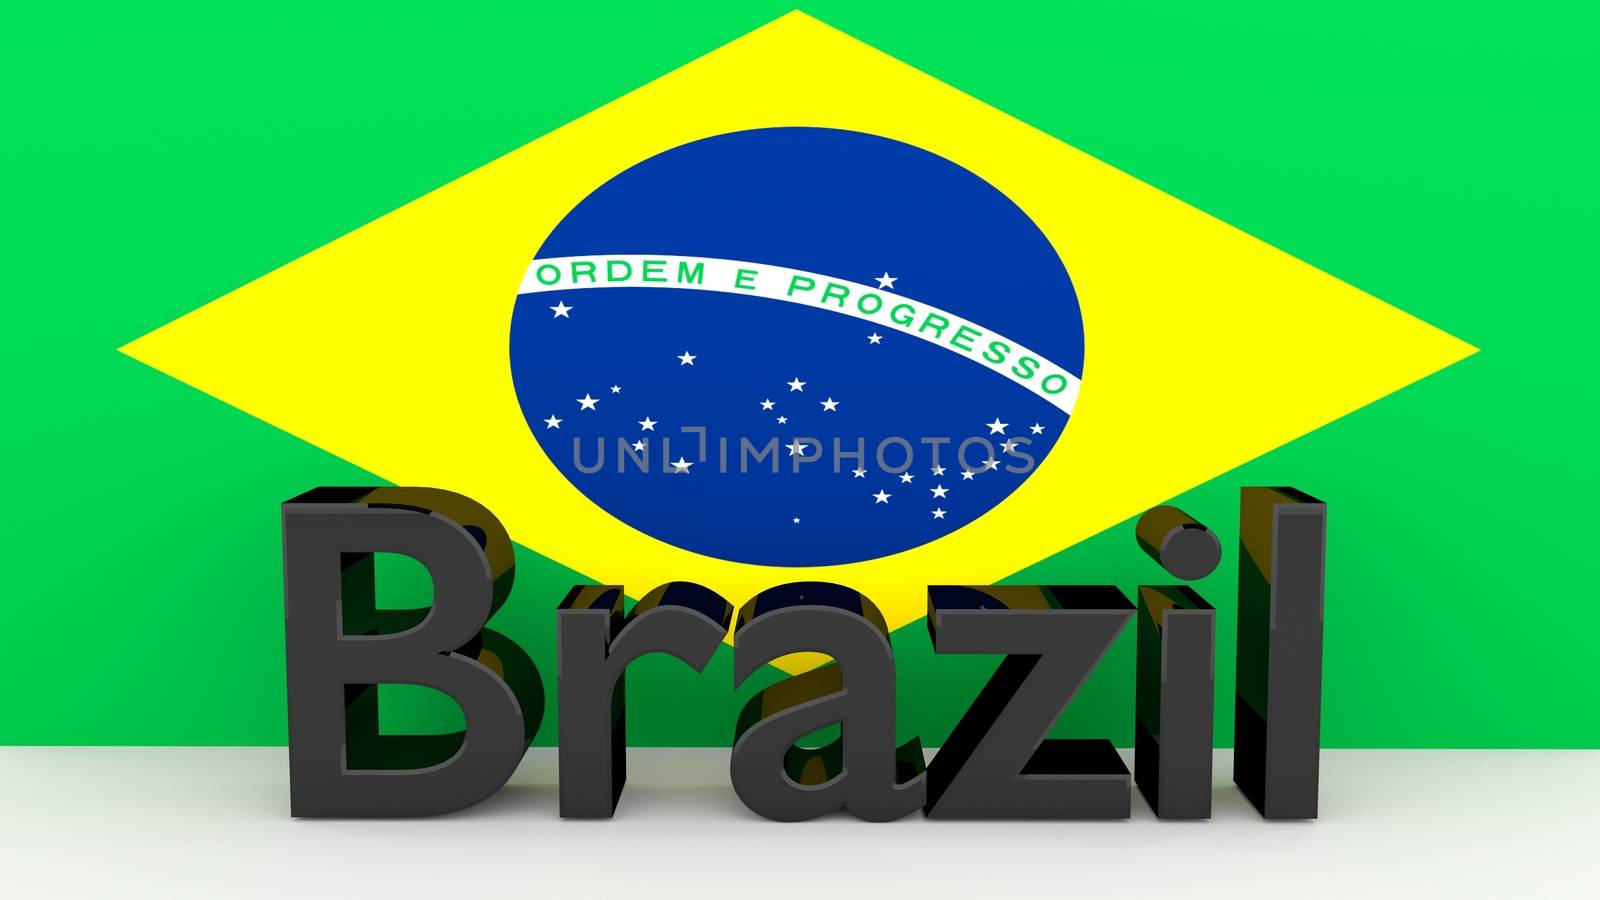 Writing Brazil made of dark metal in front of a brazilian flag